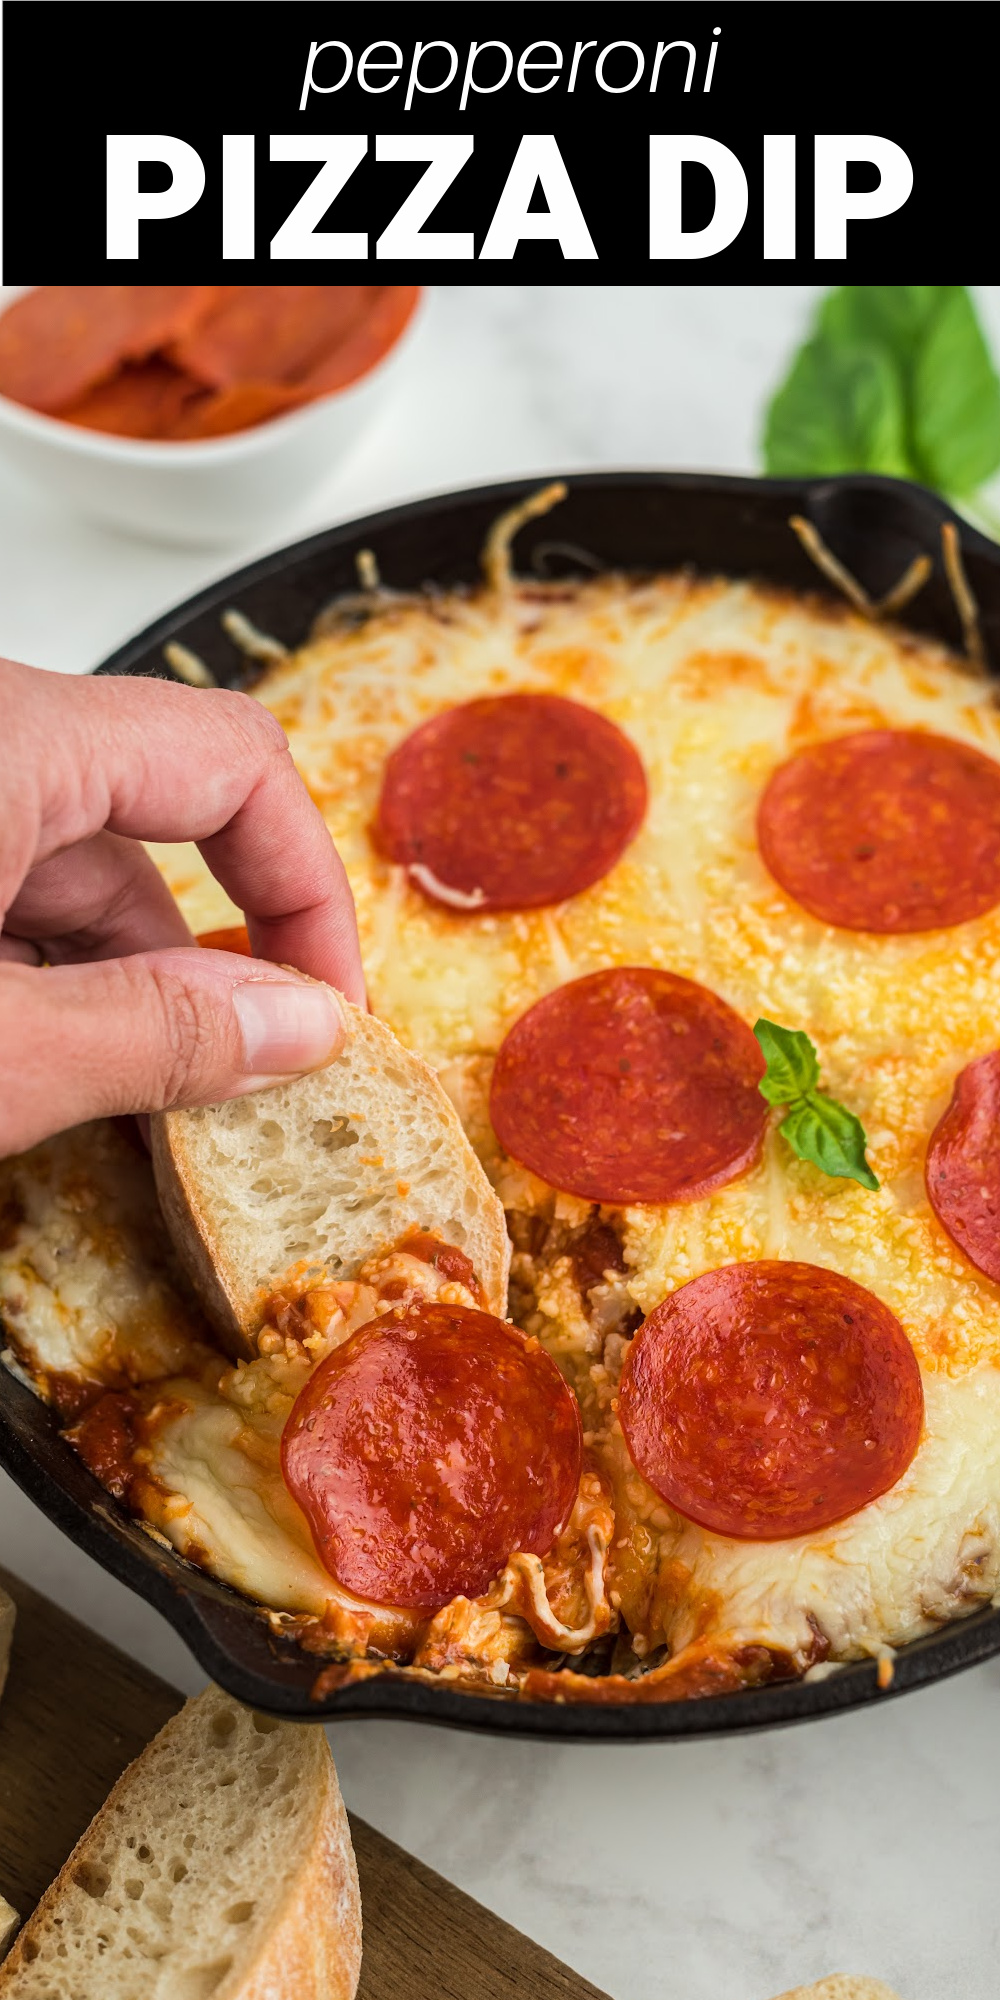 Pizza dip is the perfect cheesy dip for all your pizza lovers. This favorite appetizer is a perfect take on classic pizza in appetizer form baked in under 30 minutes!